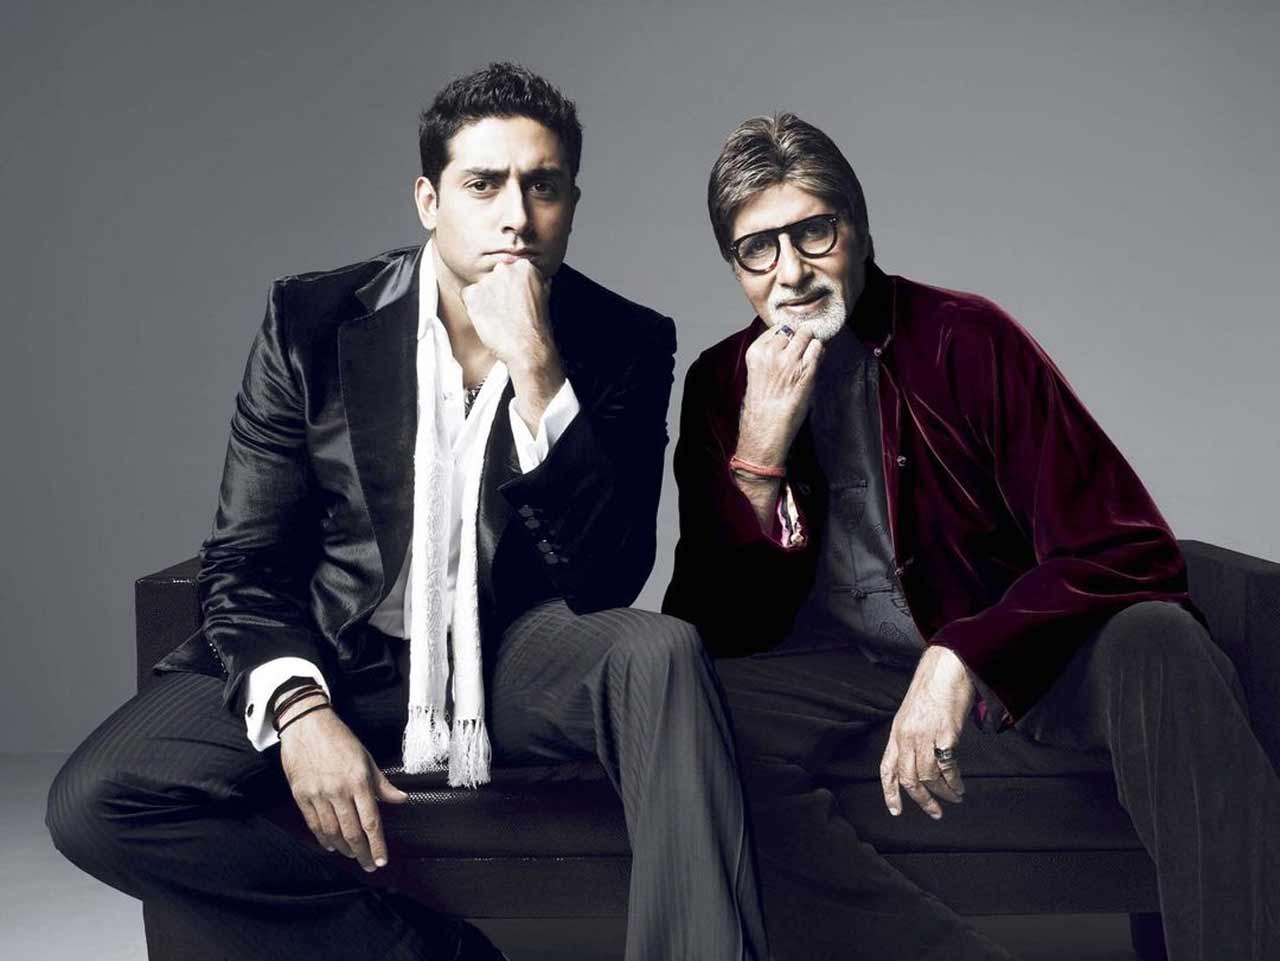 Abhishek Bachchan, on his Instagram account, shared a picture with his father and megastar Amitabh Bachchan, mentioning him as the 